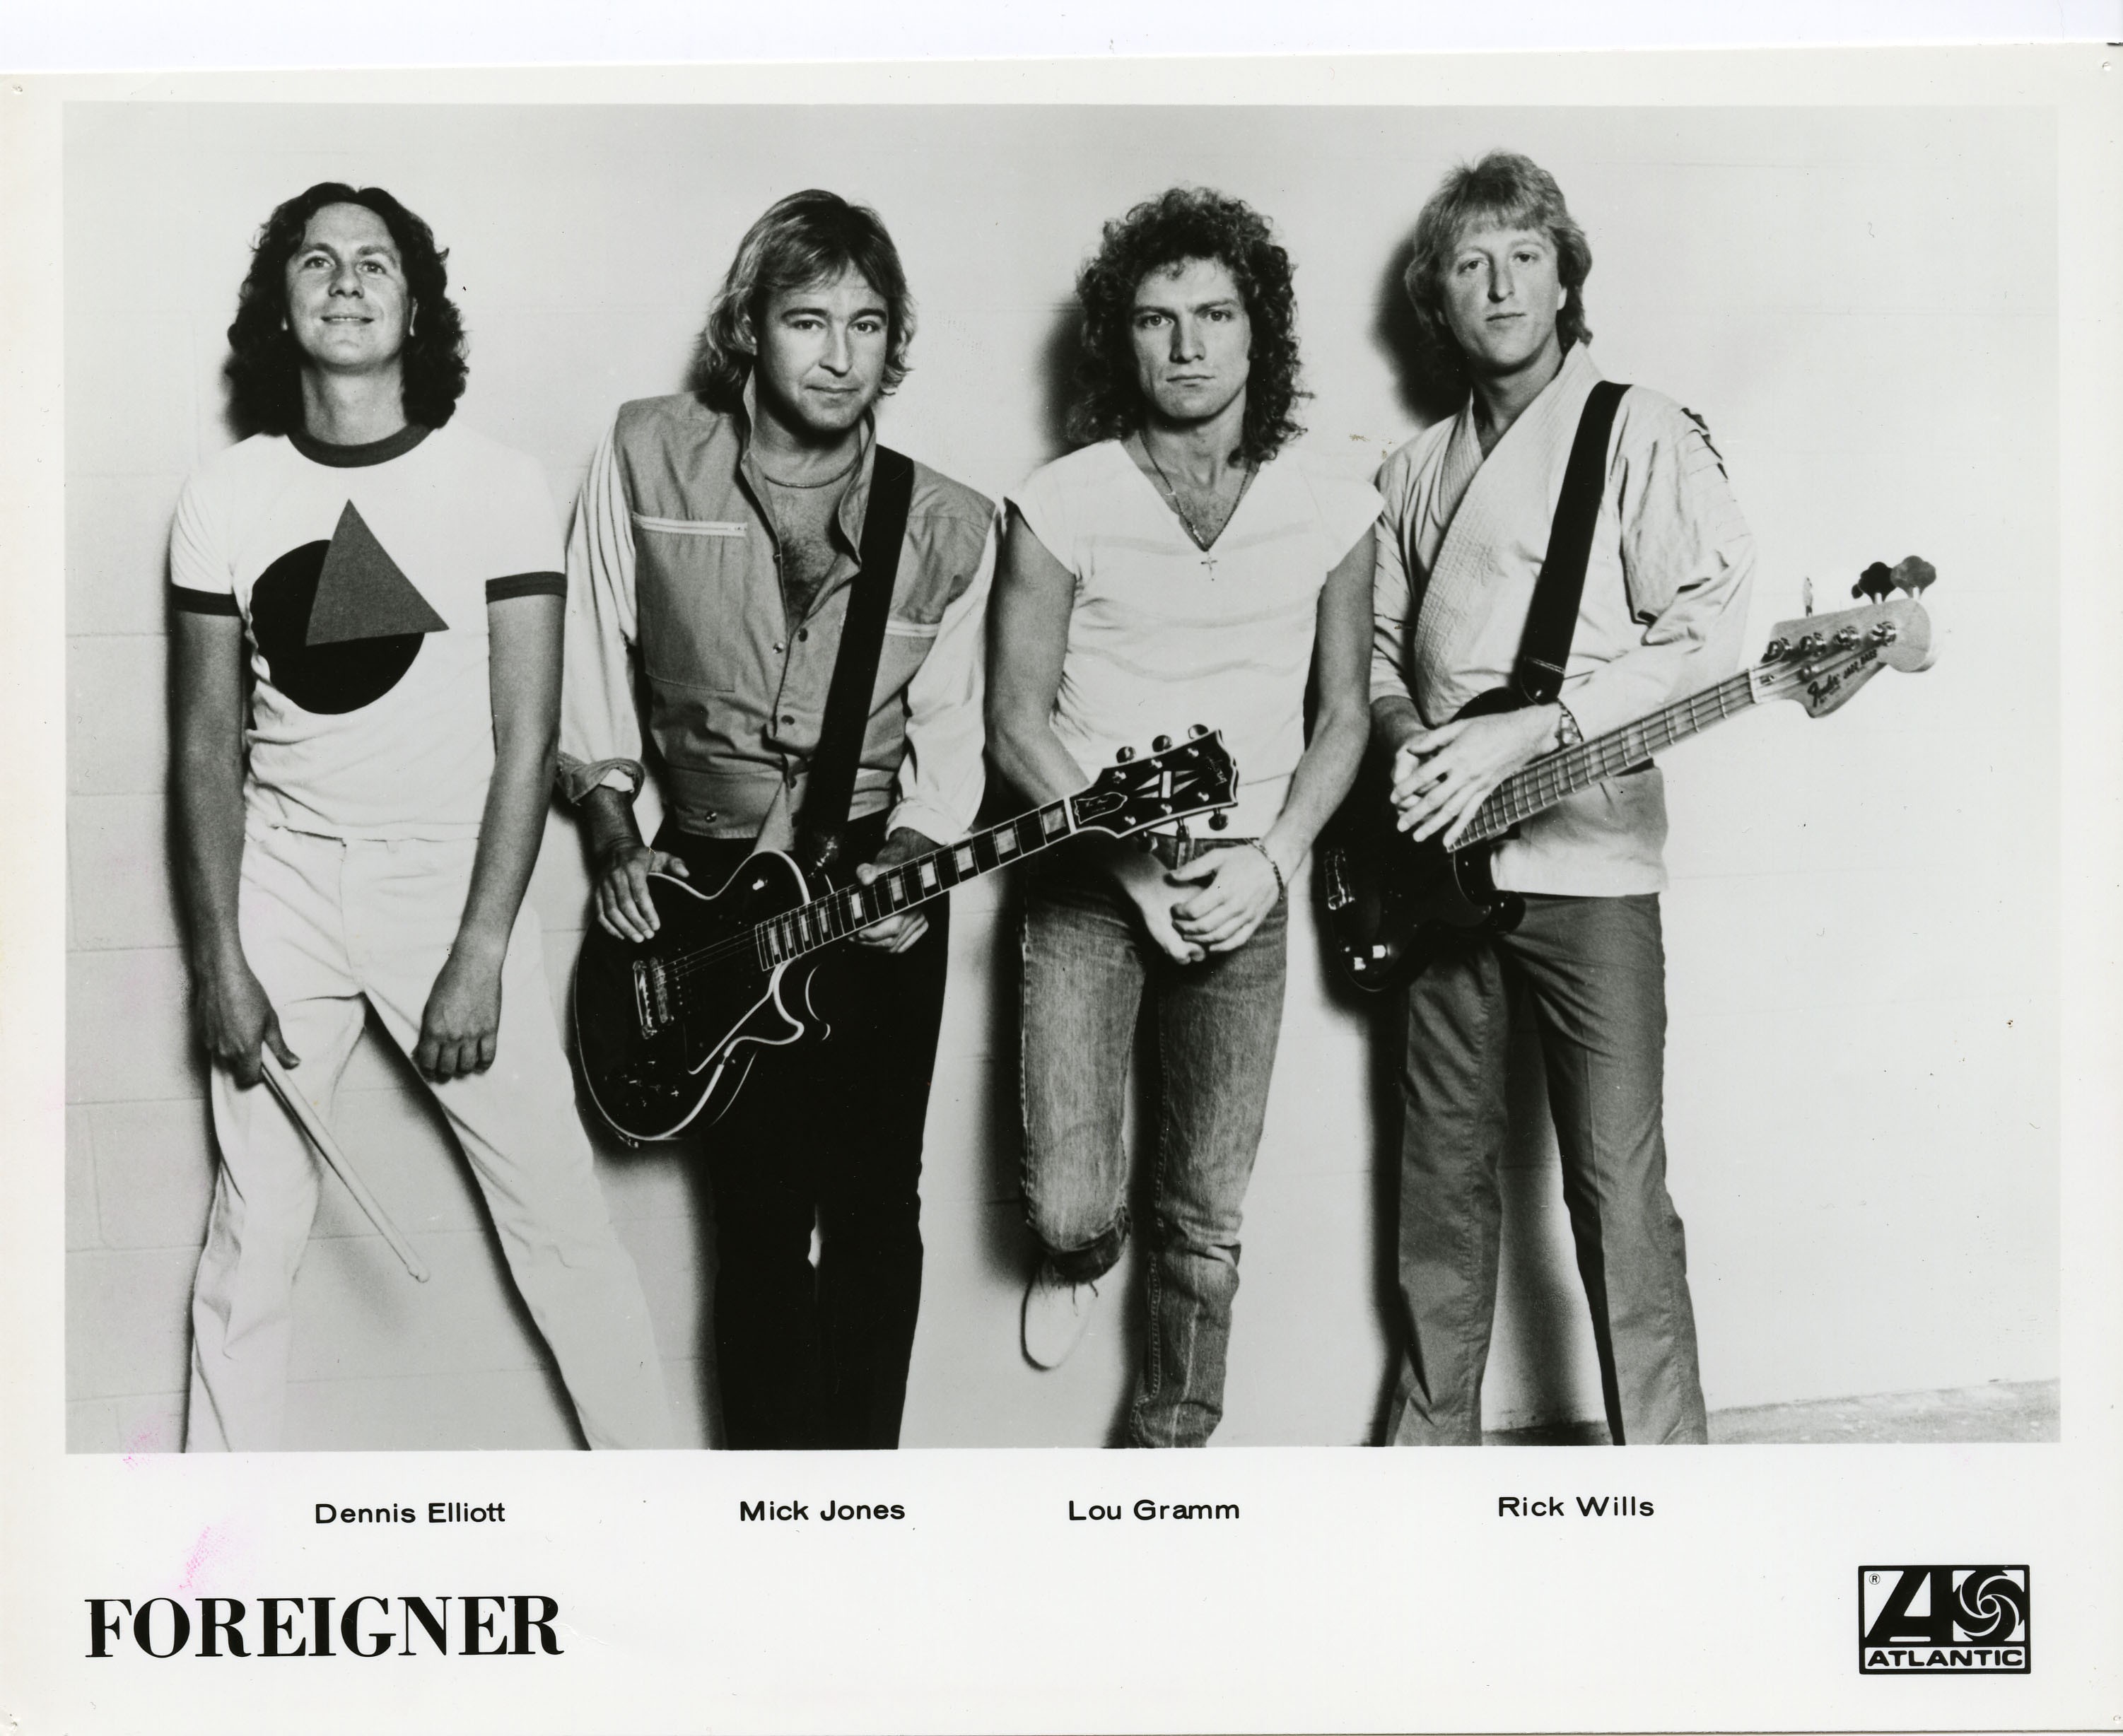 Foreigner, circa the 1970s, with band founders Mick Jones (second from left) and Lou Gramm (second from right). Photo: Alamy